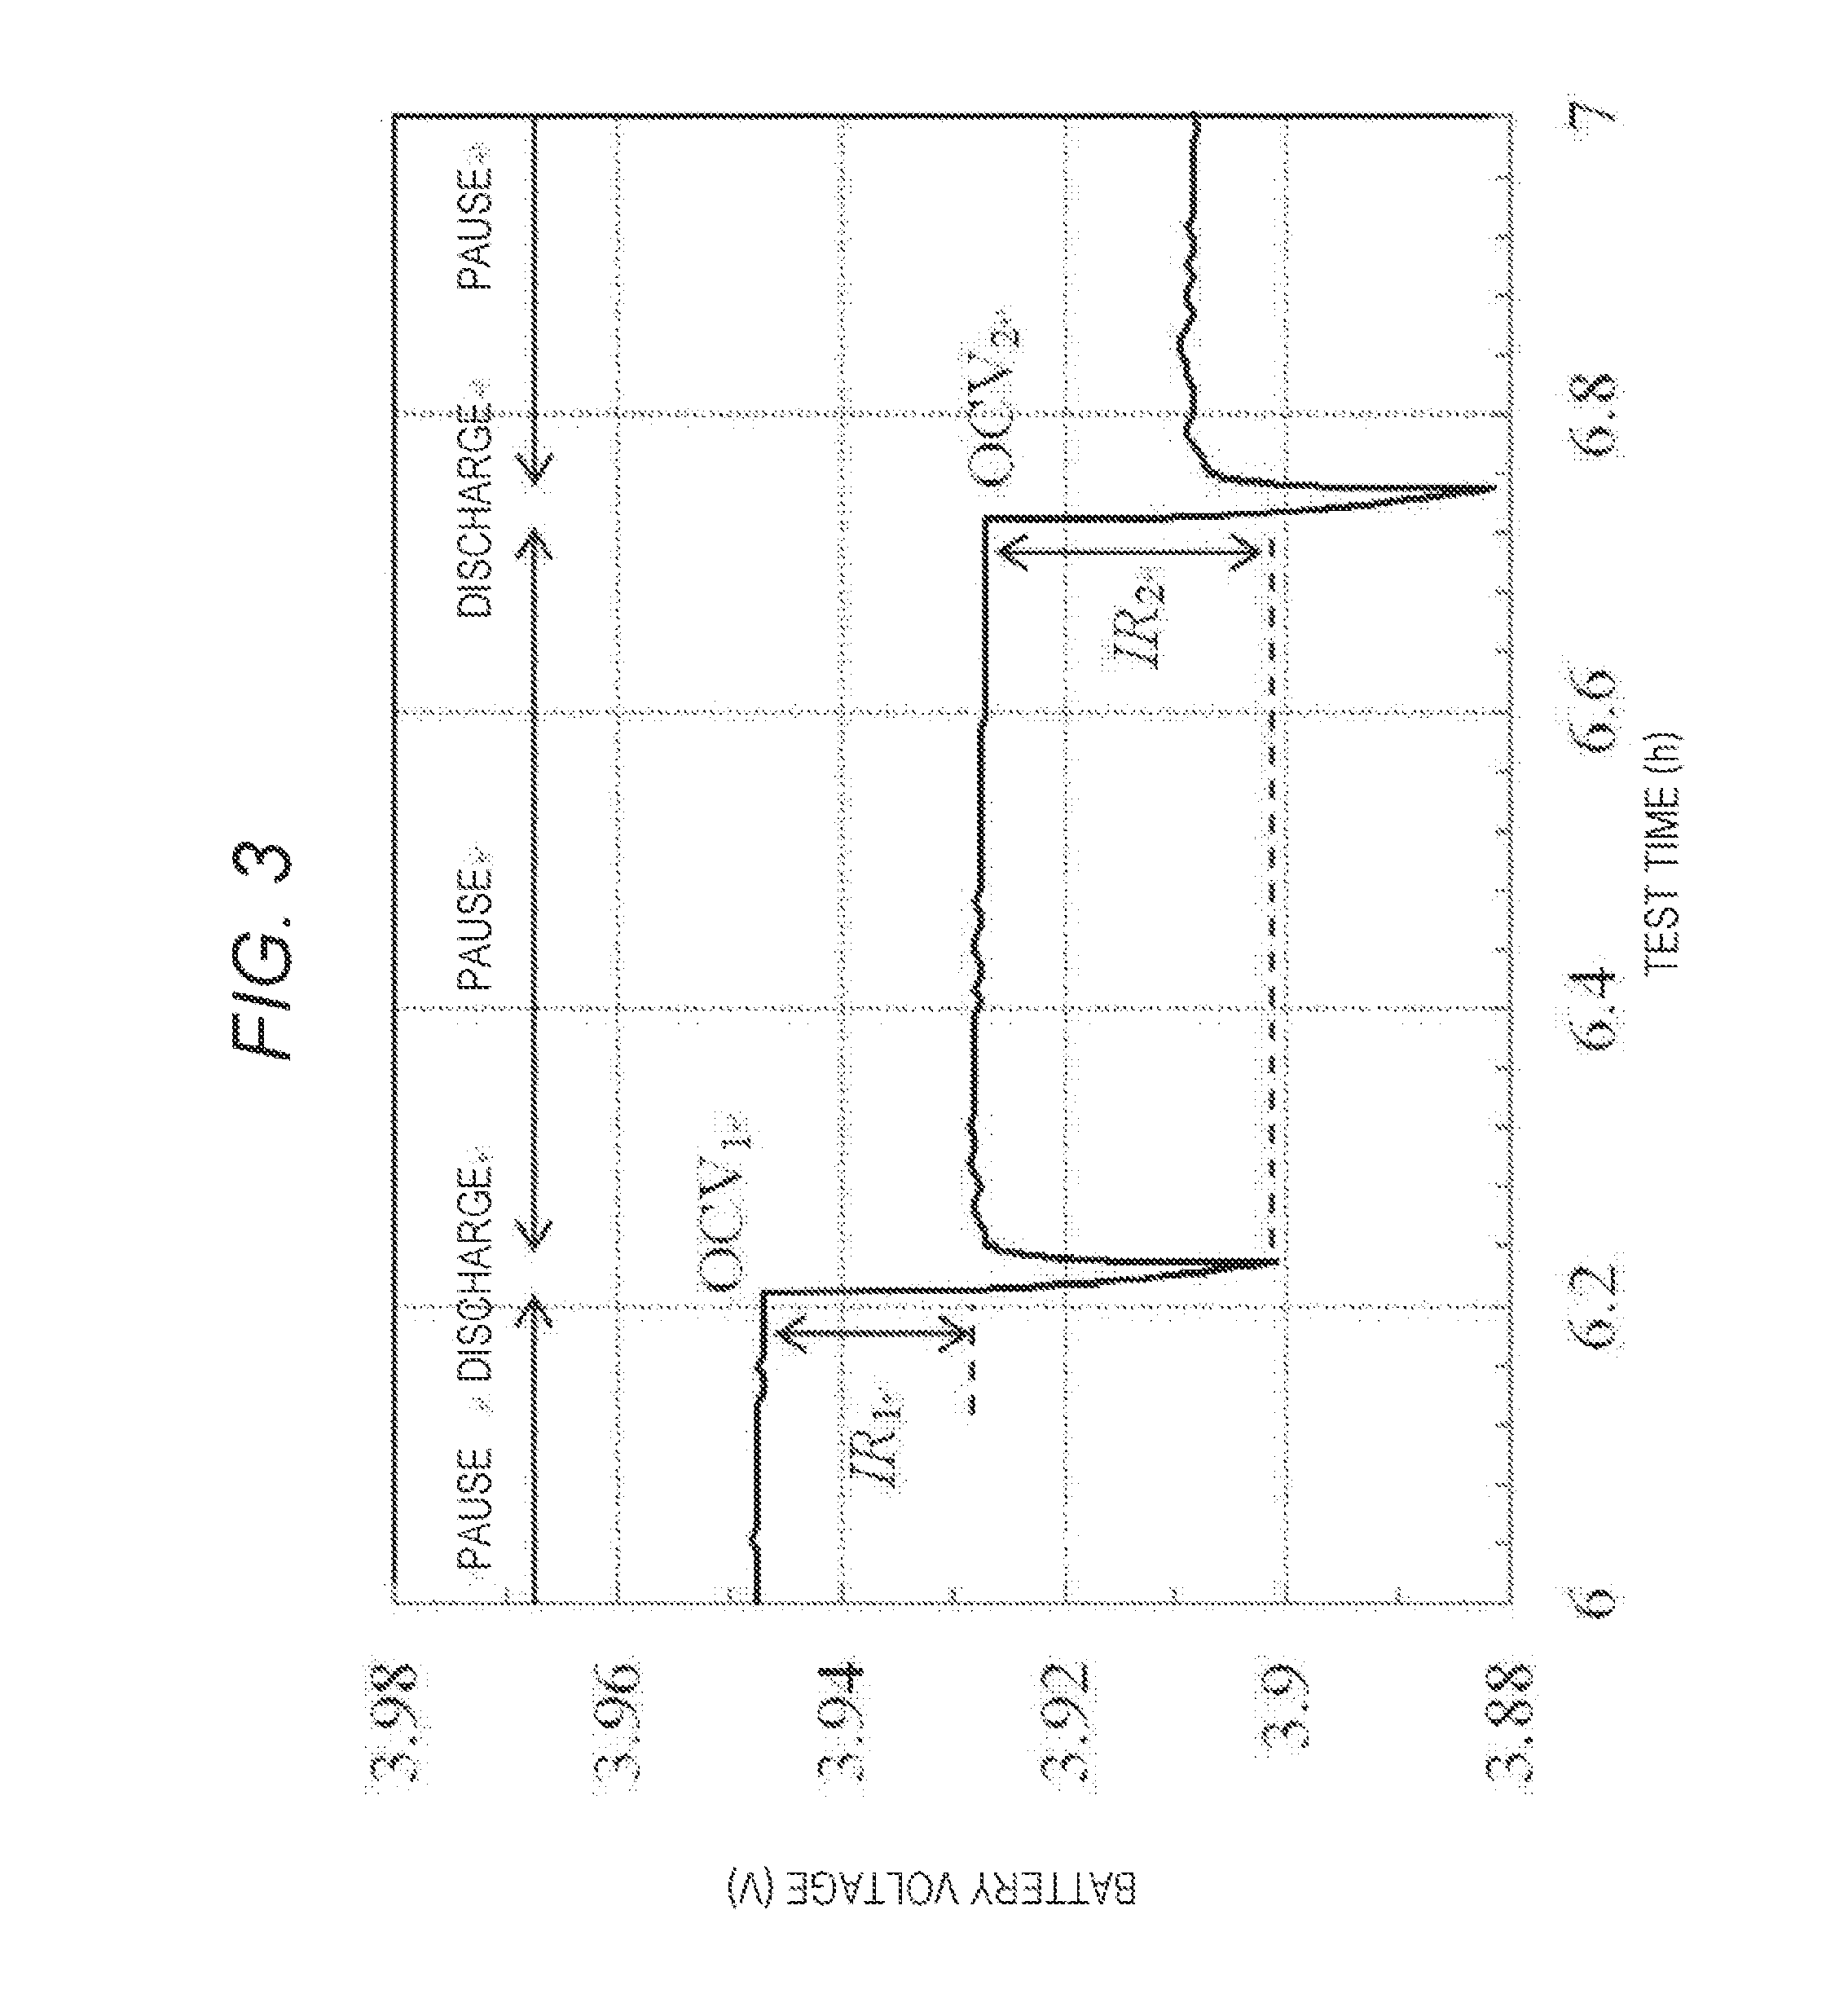 Method of Controlling Secondary Battery